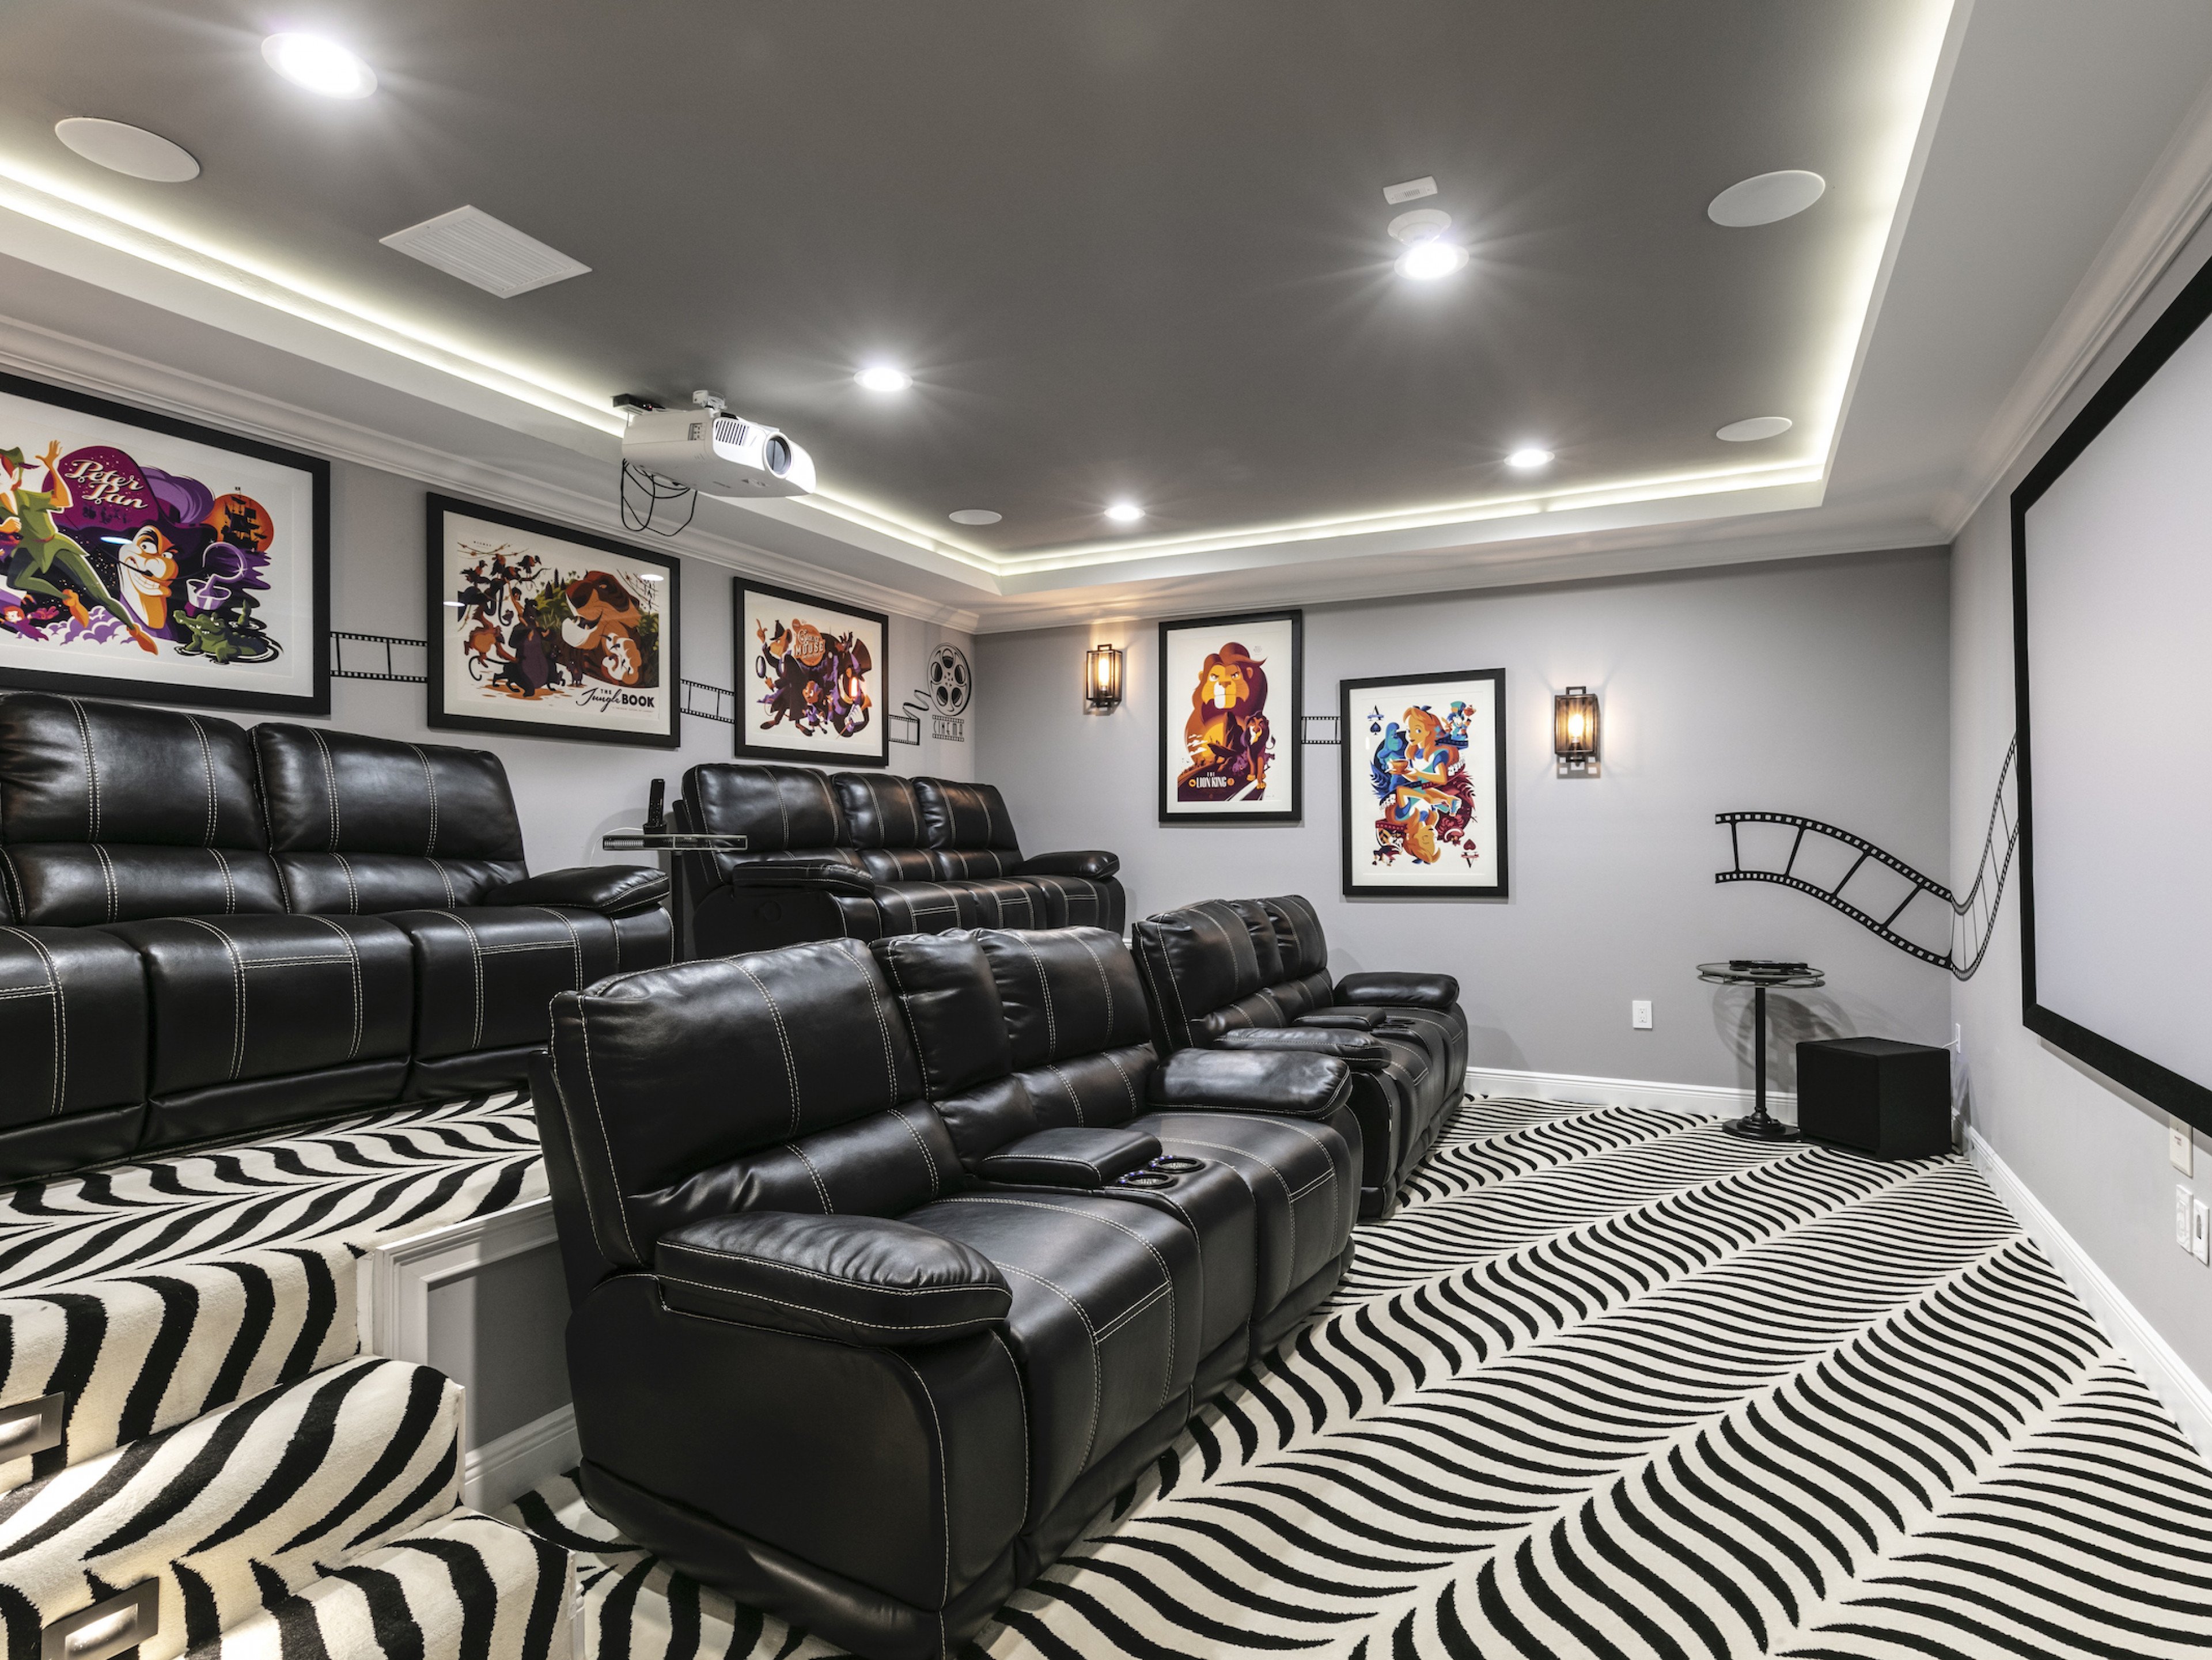 Reunion Resort 992 - vacation rentals with home theaters